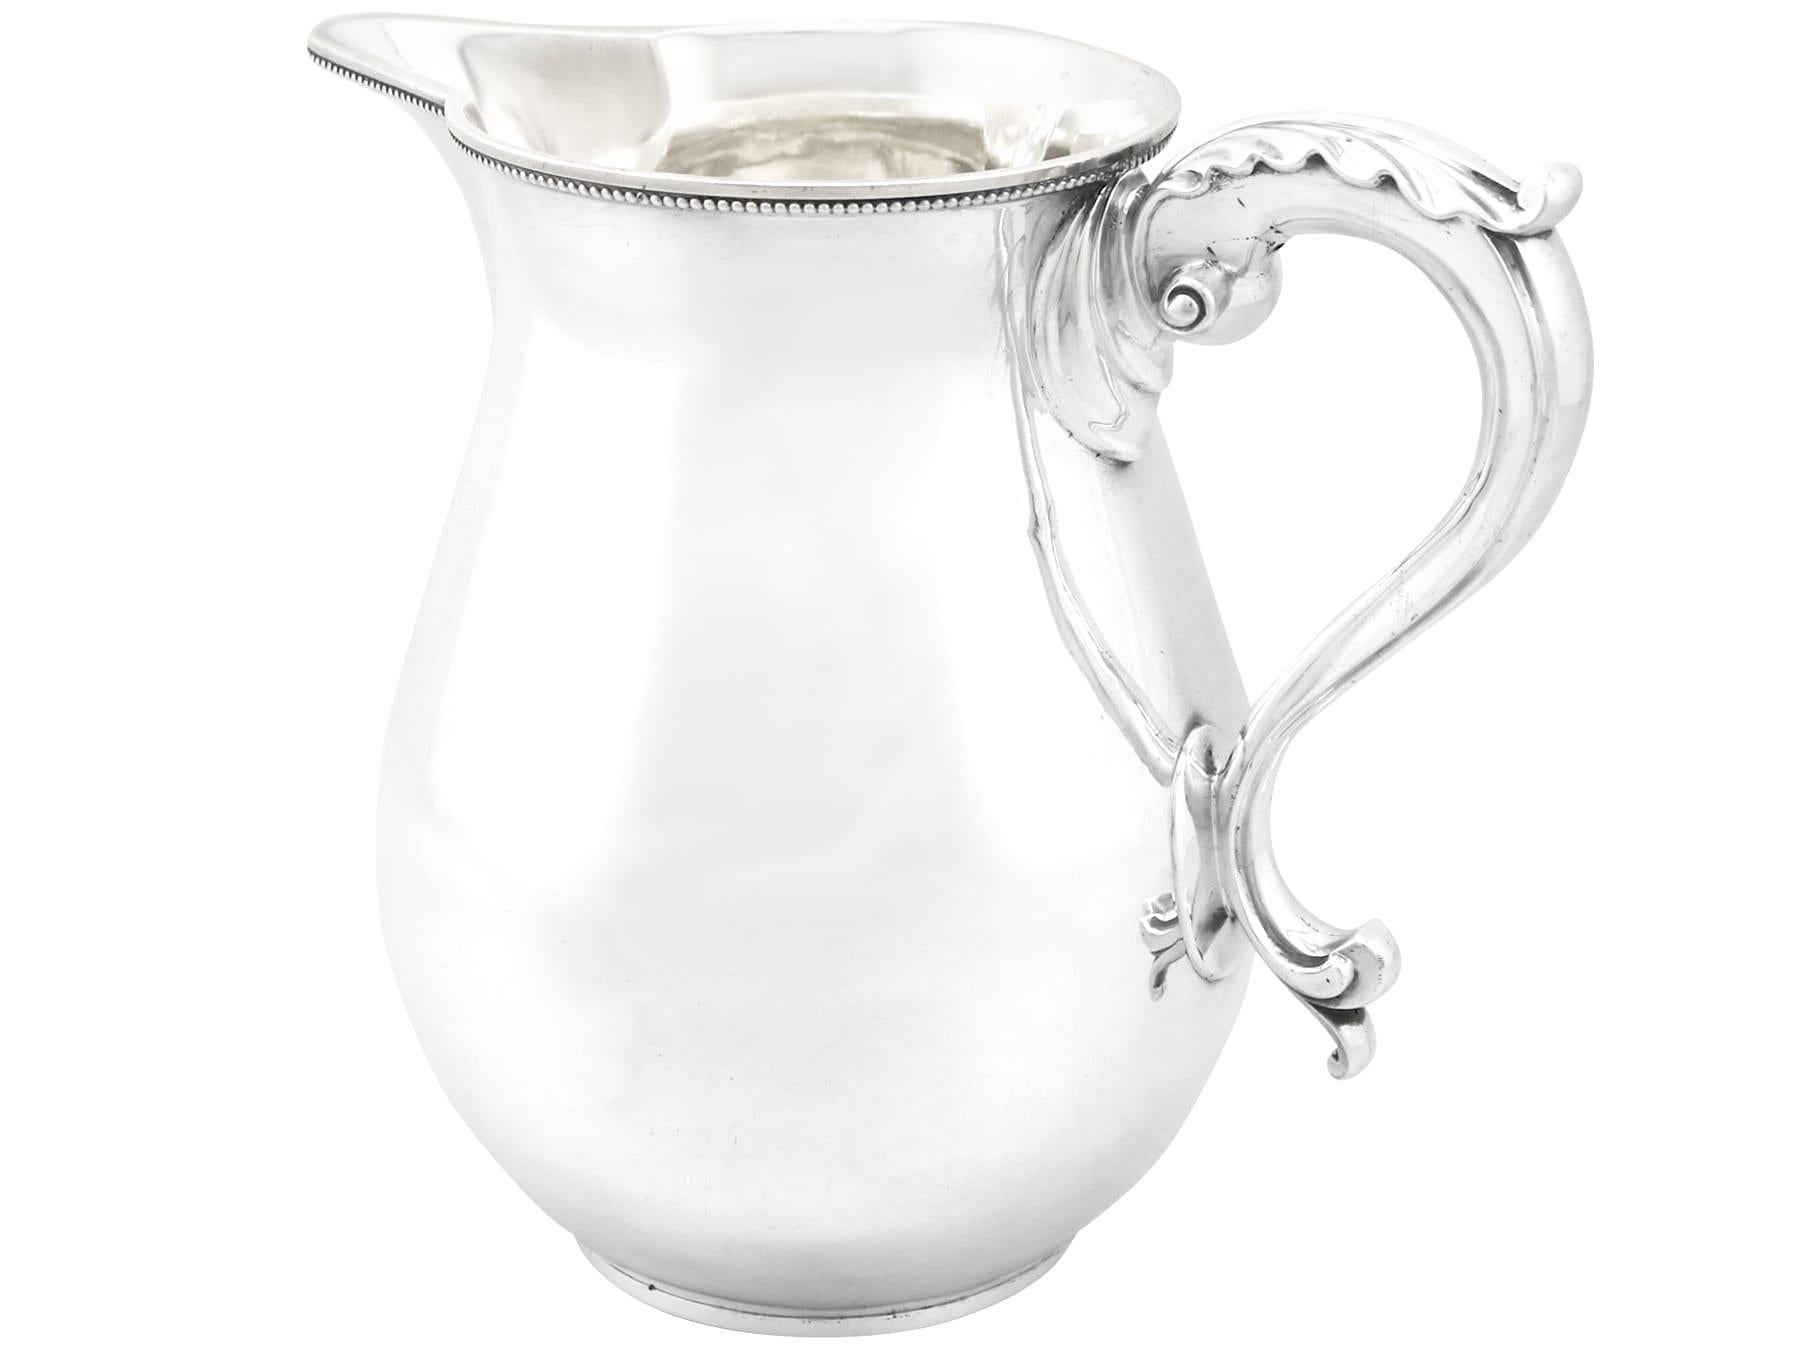 Antique Thomas Chawner 1780s Sterling Silver Beer or Water Jug In Excellent Condition For Sale In Jesmond, Newcastle Upon Tyne